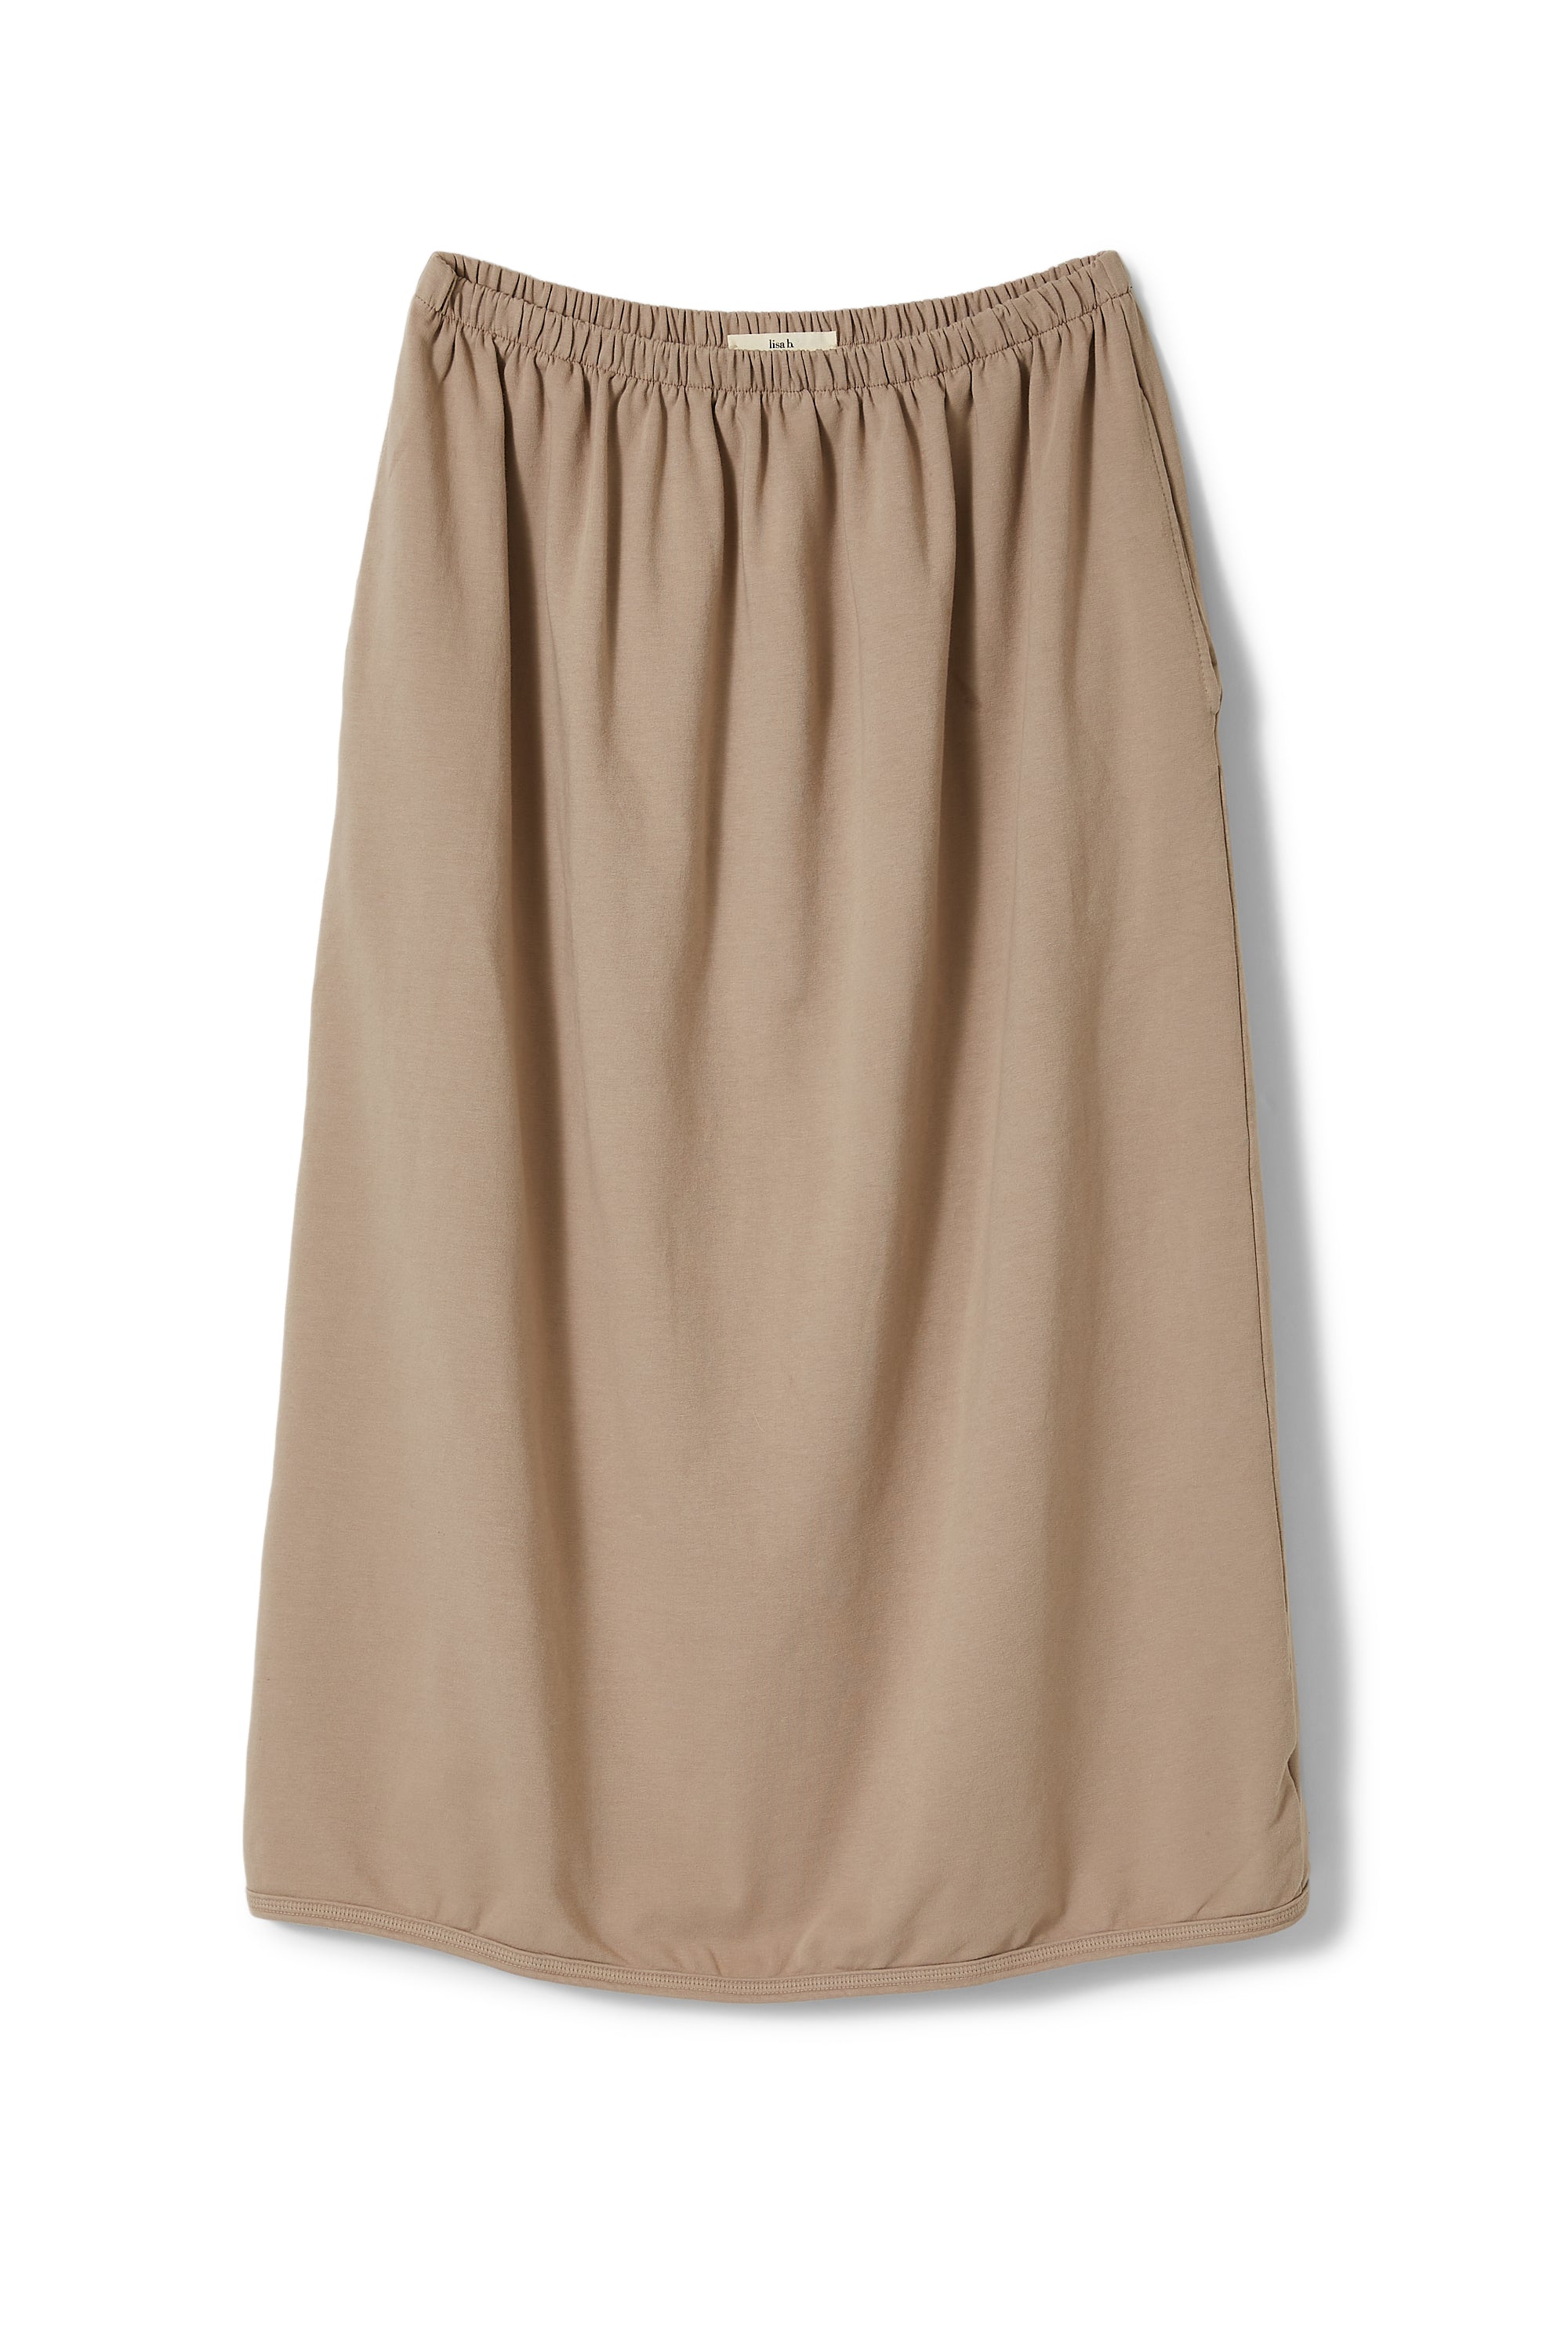 lisa b. cotton skirt in clay